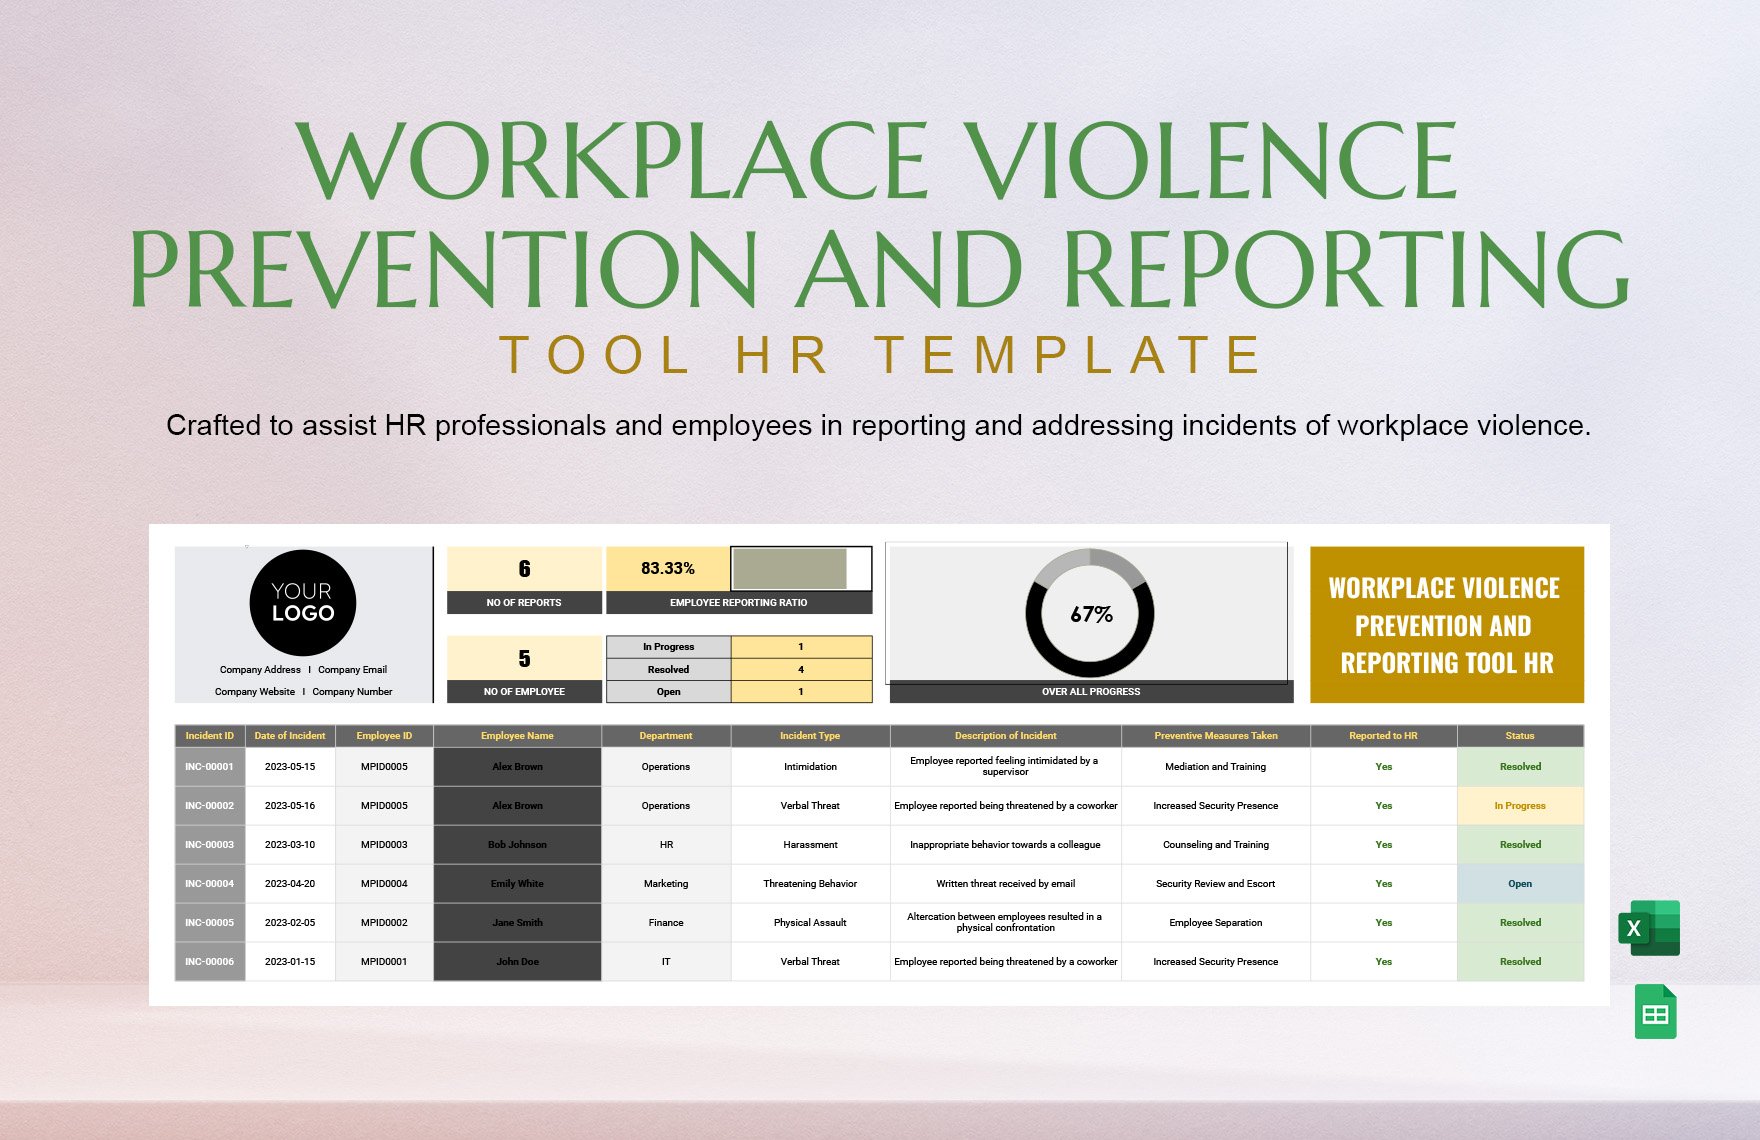 Workplace Violence Prevention and Reporting Tool HR Template